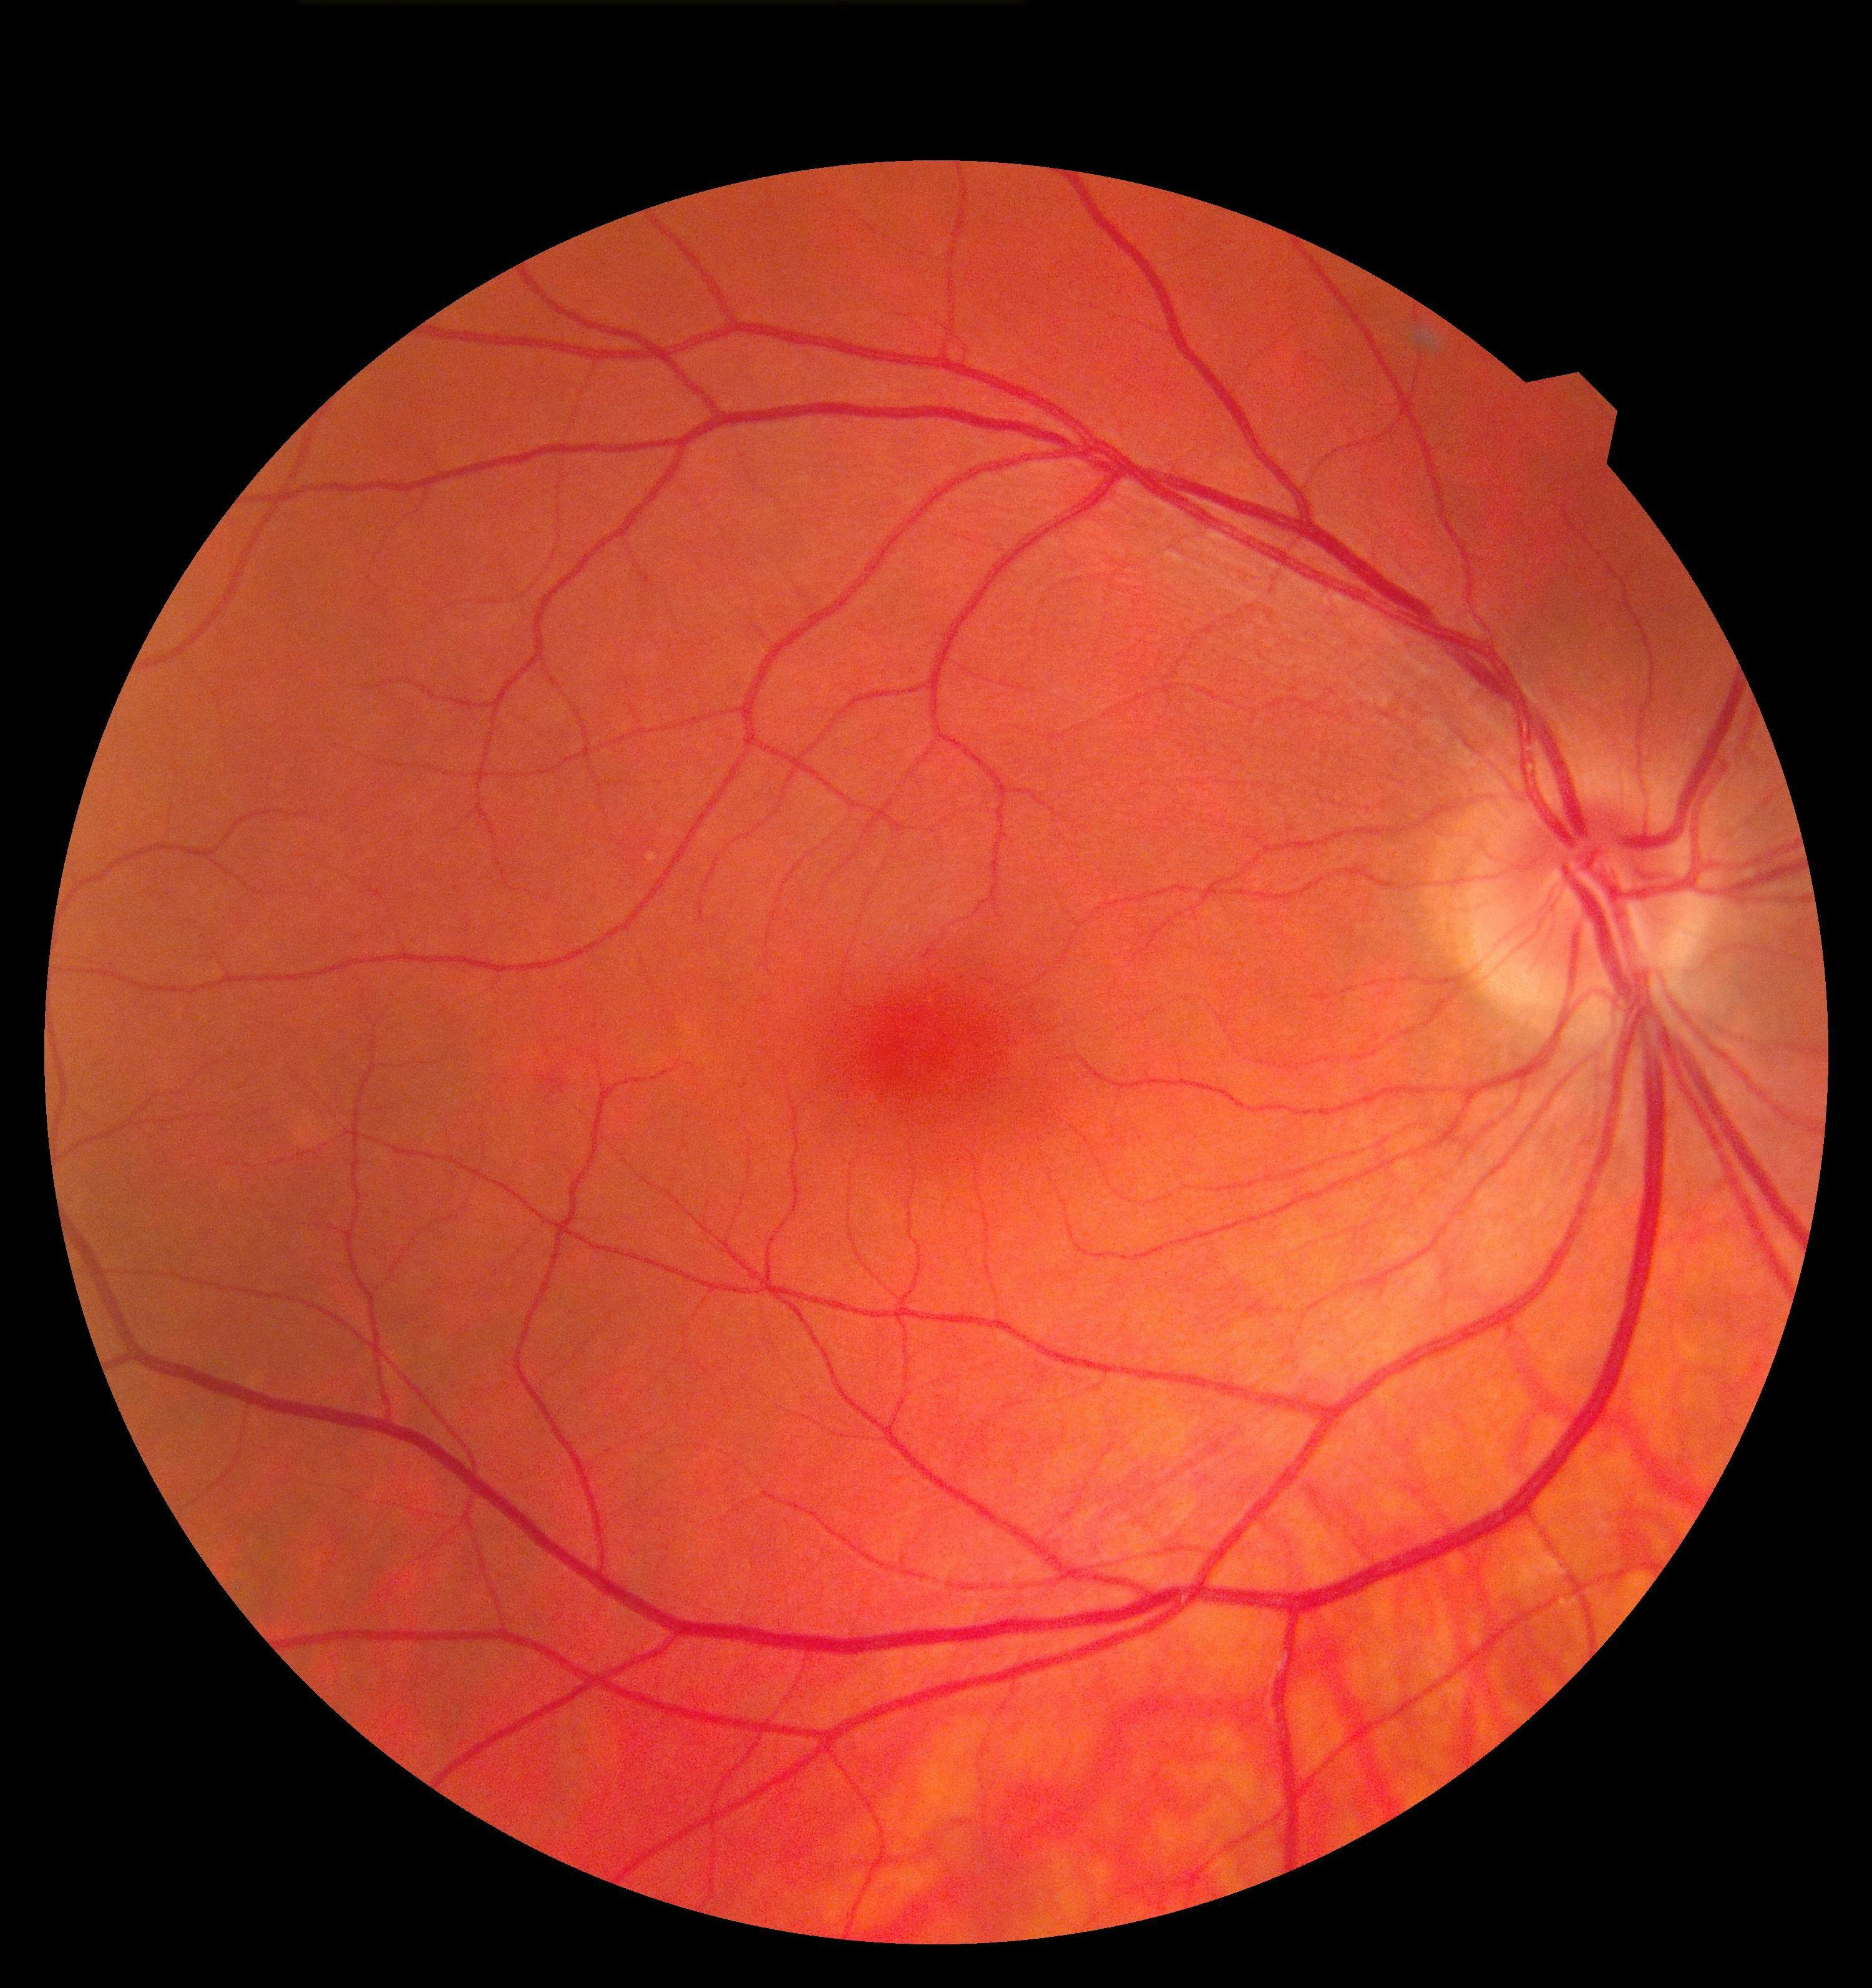 New Study Shows Extended-Dose EYLEA HD is Effective for wAMD and DME